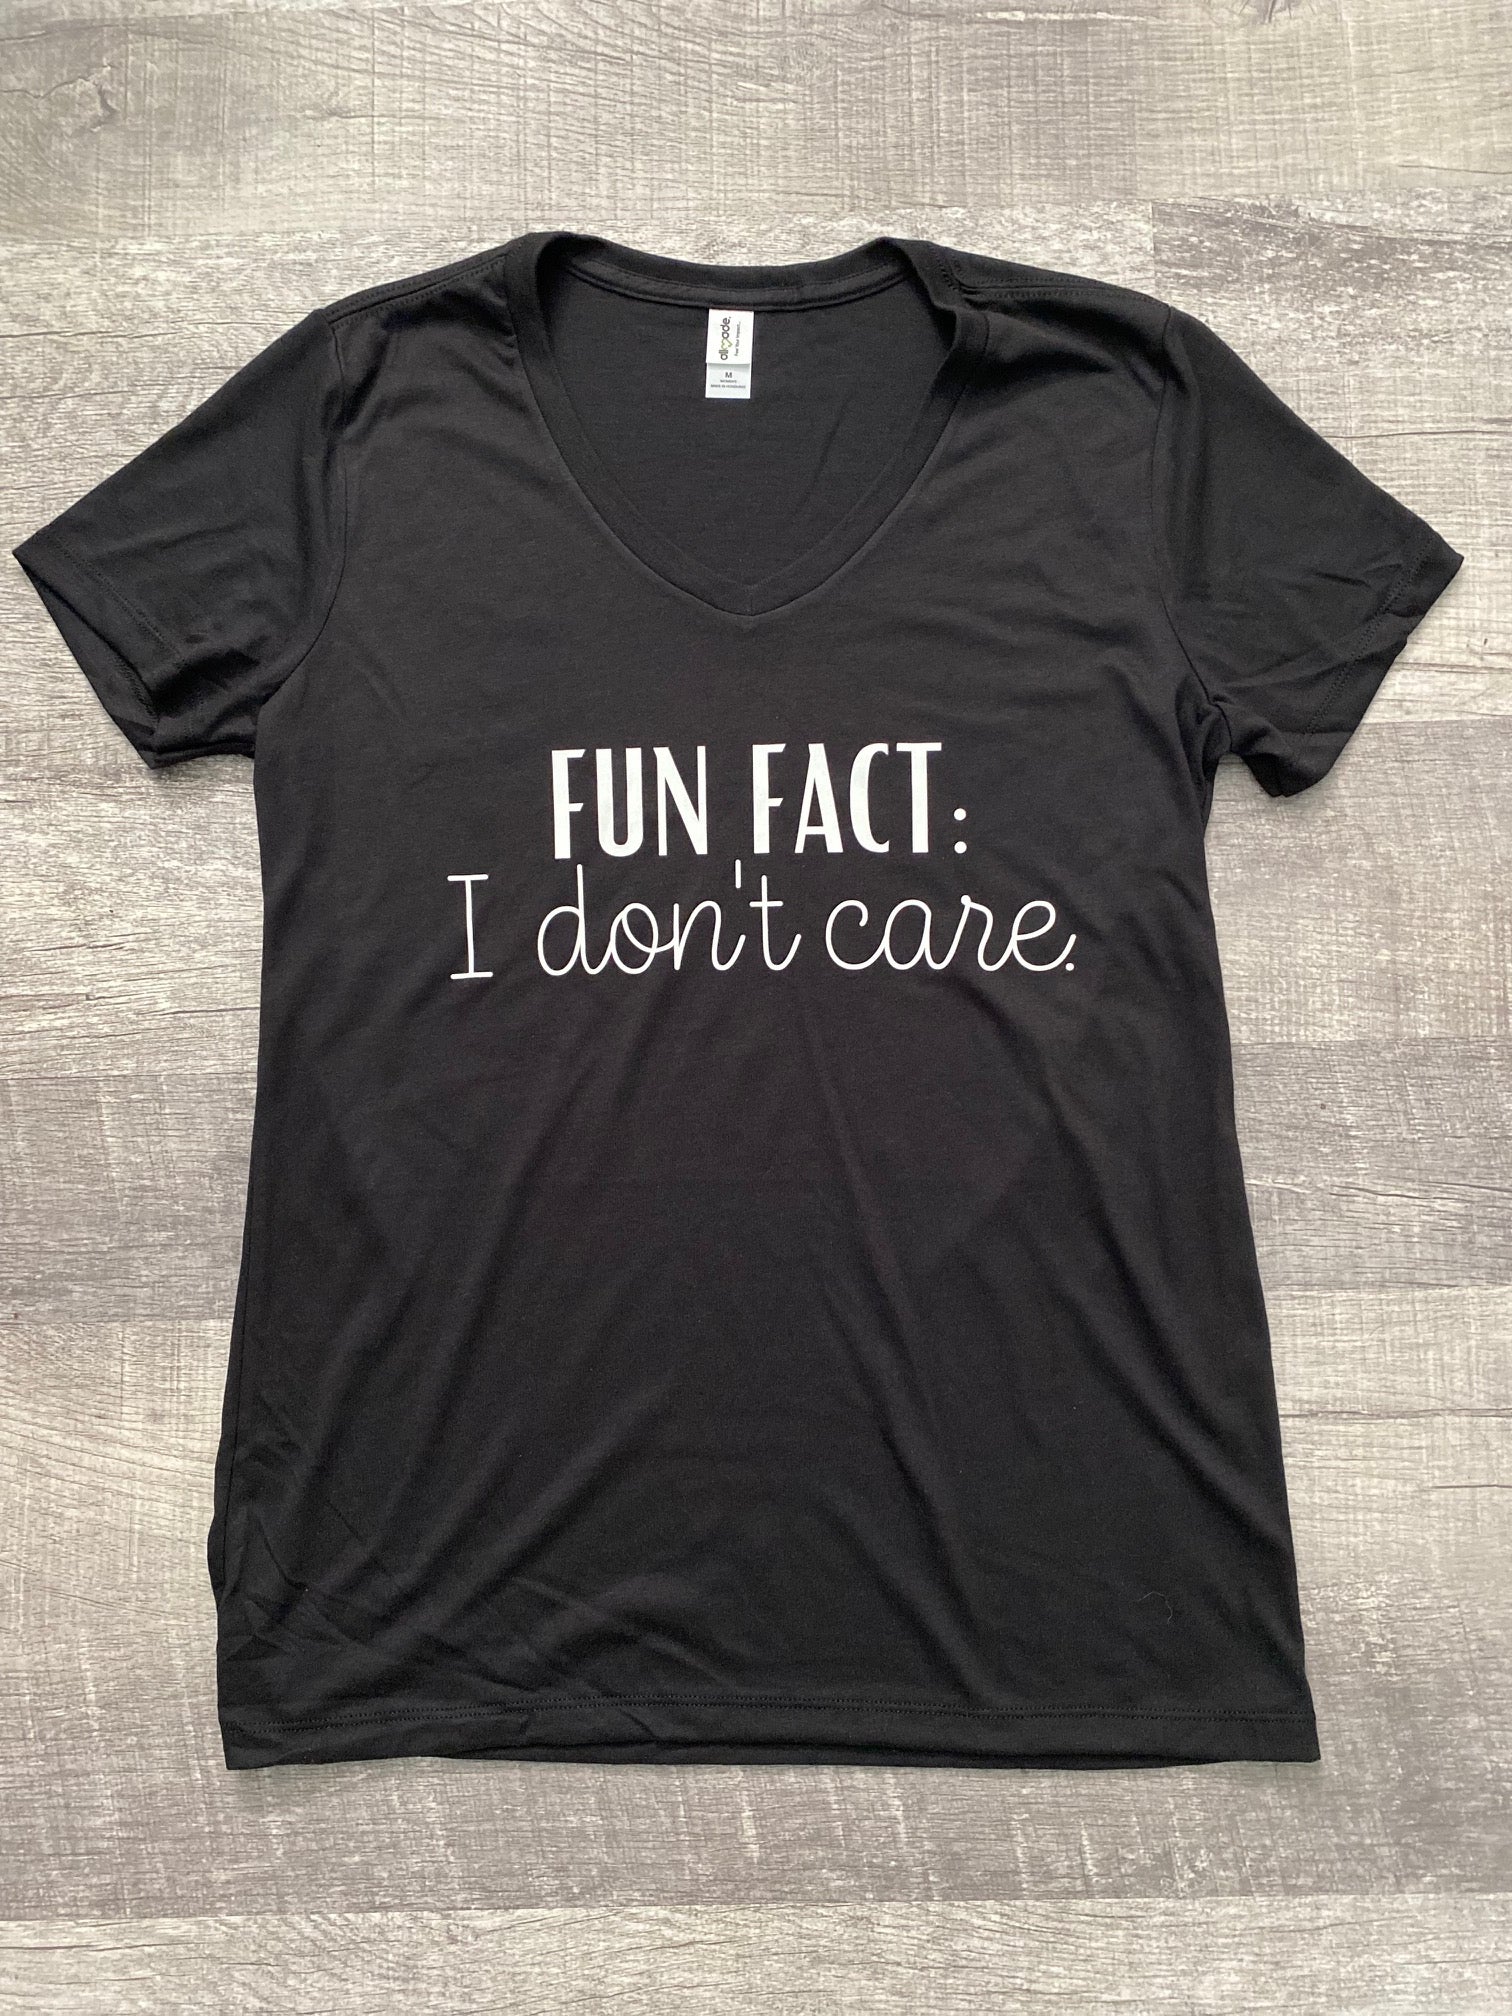 Black V-Neck T-Shirt with "FUN FACT:" printed on the front and then "I don't care." printed below it.